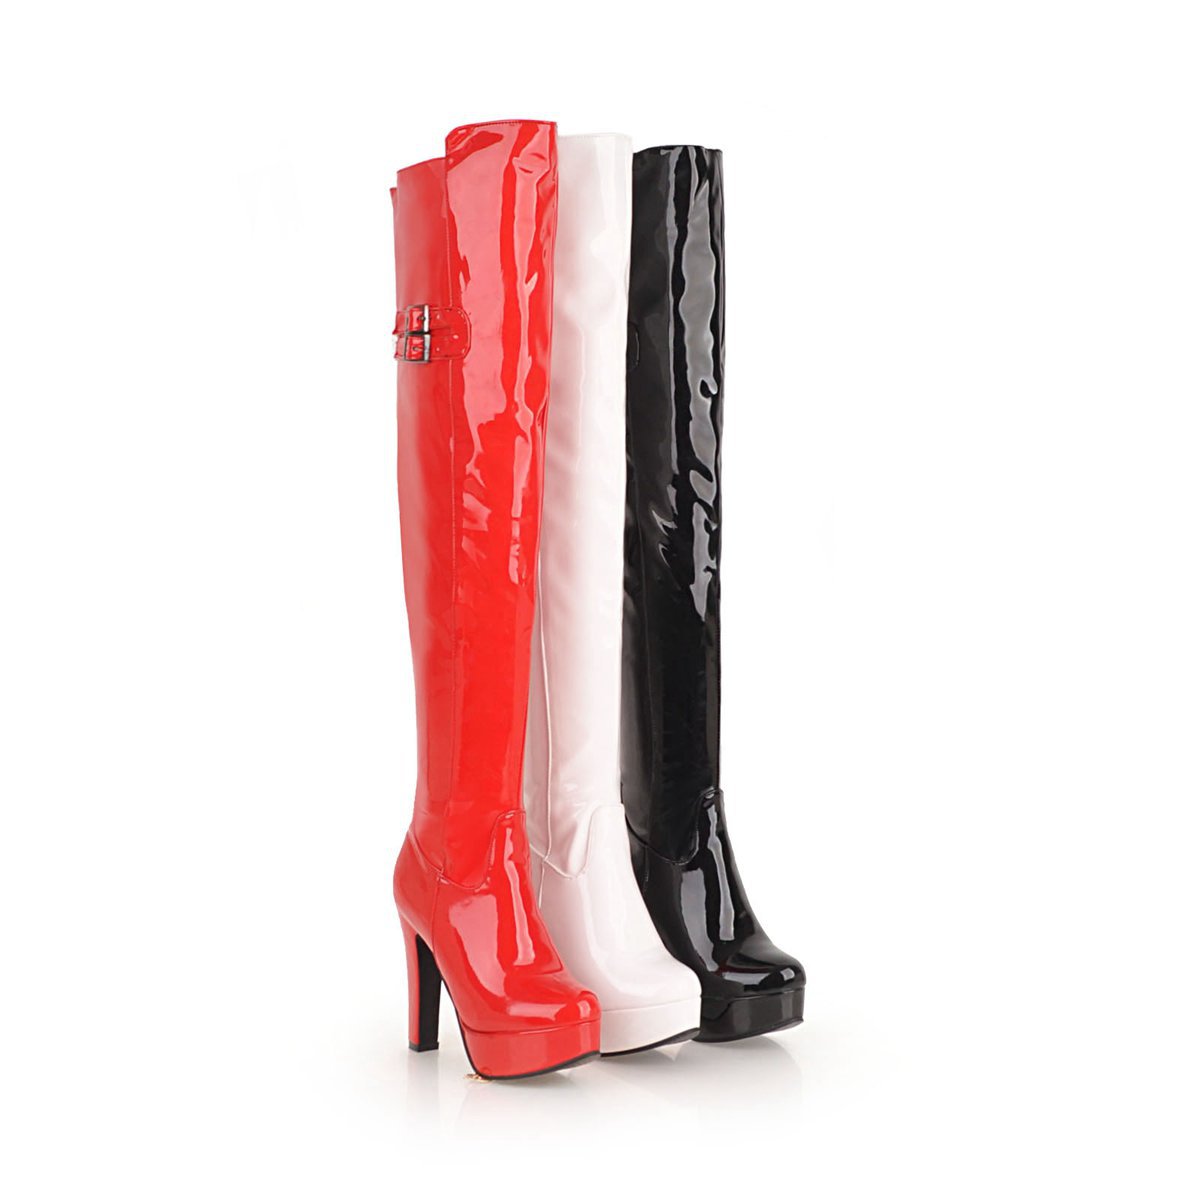 Patent Leather Platform High Heels Tall Boots Winter Shoes for Woman 4428